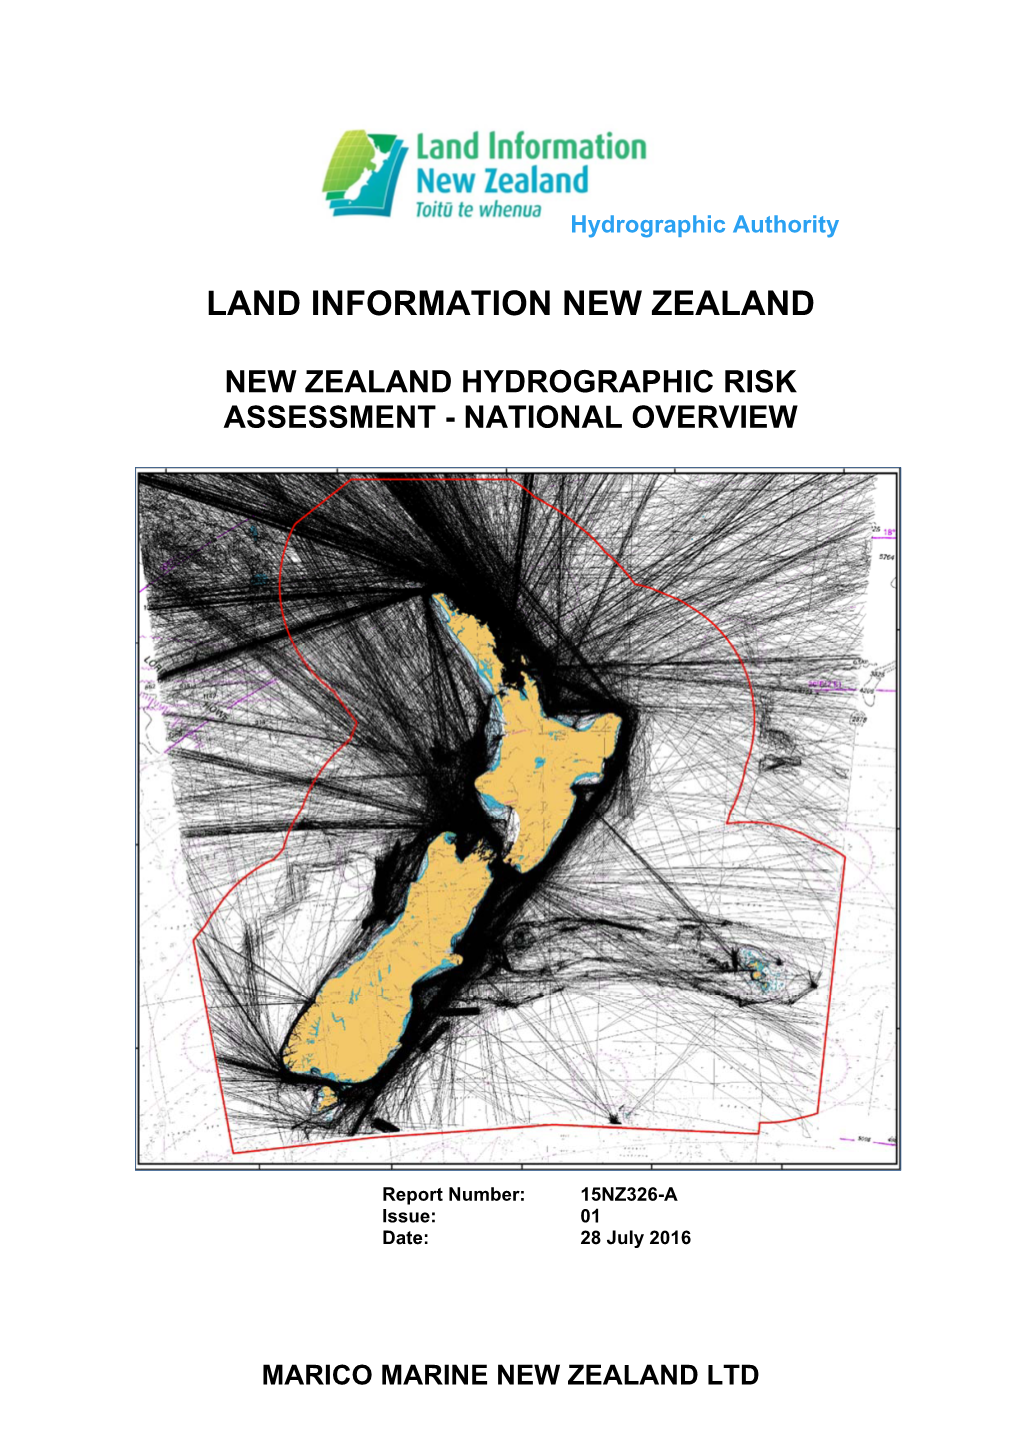 New Zealand Hydrographic Risk Assessment - National Overview